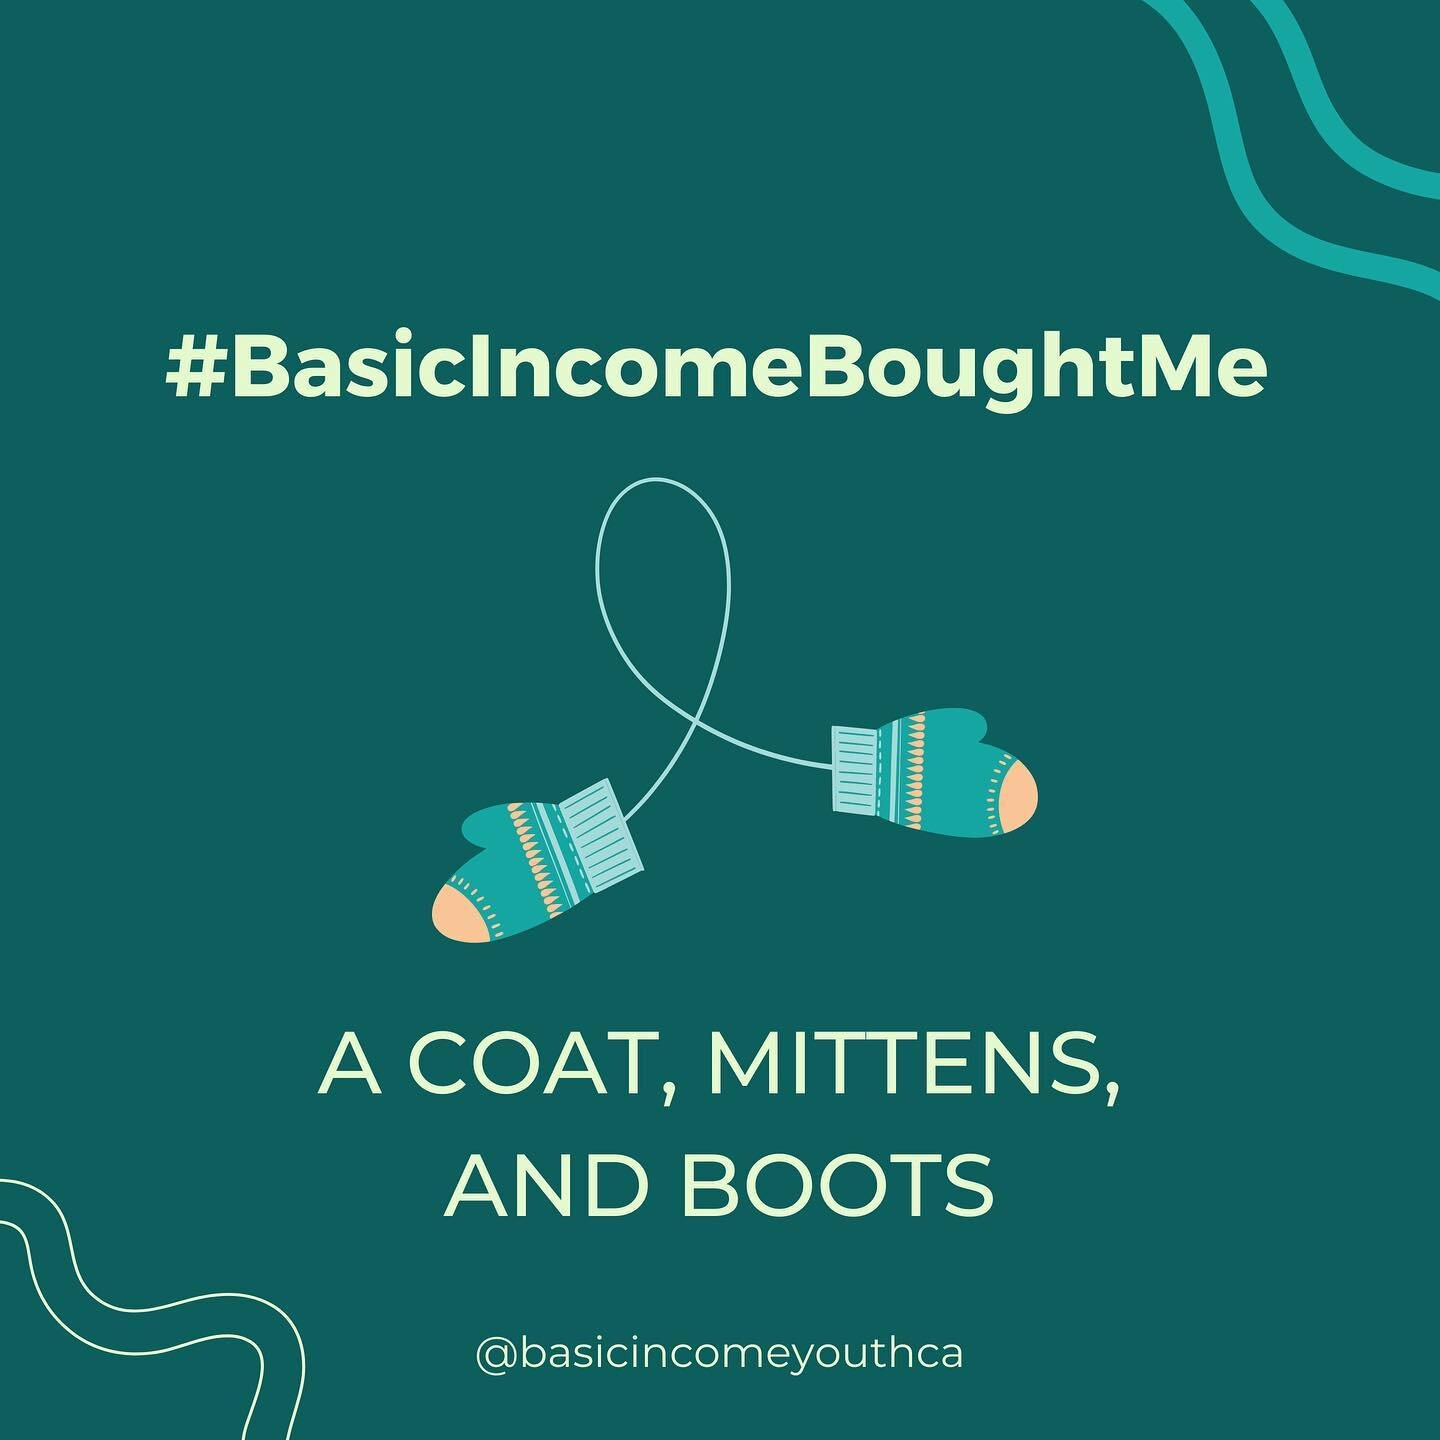 When it comes to winter clothing like jackets and coats, getting good quality items that actually keep us warm is an investment - and one that not everyone can afford. For this OBIP participant (and many others), #BasicIncomeBoughtMe a new collection